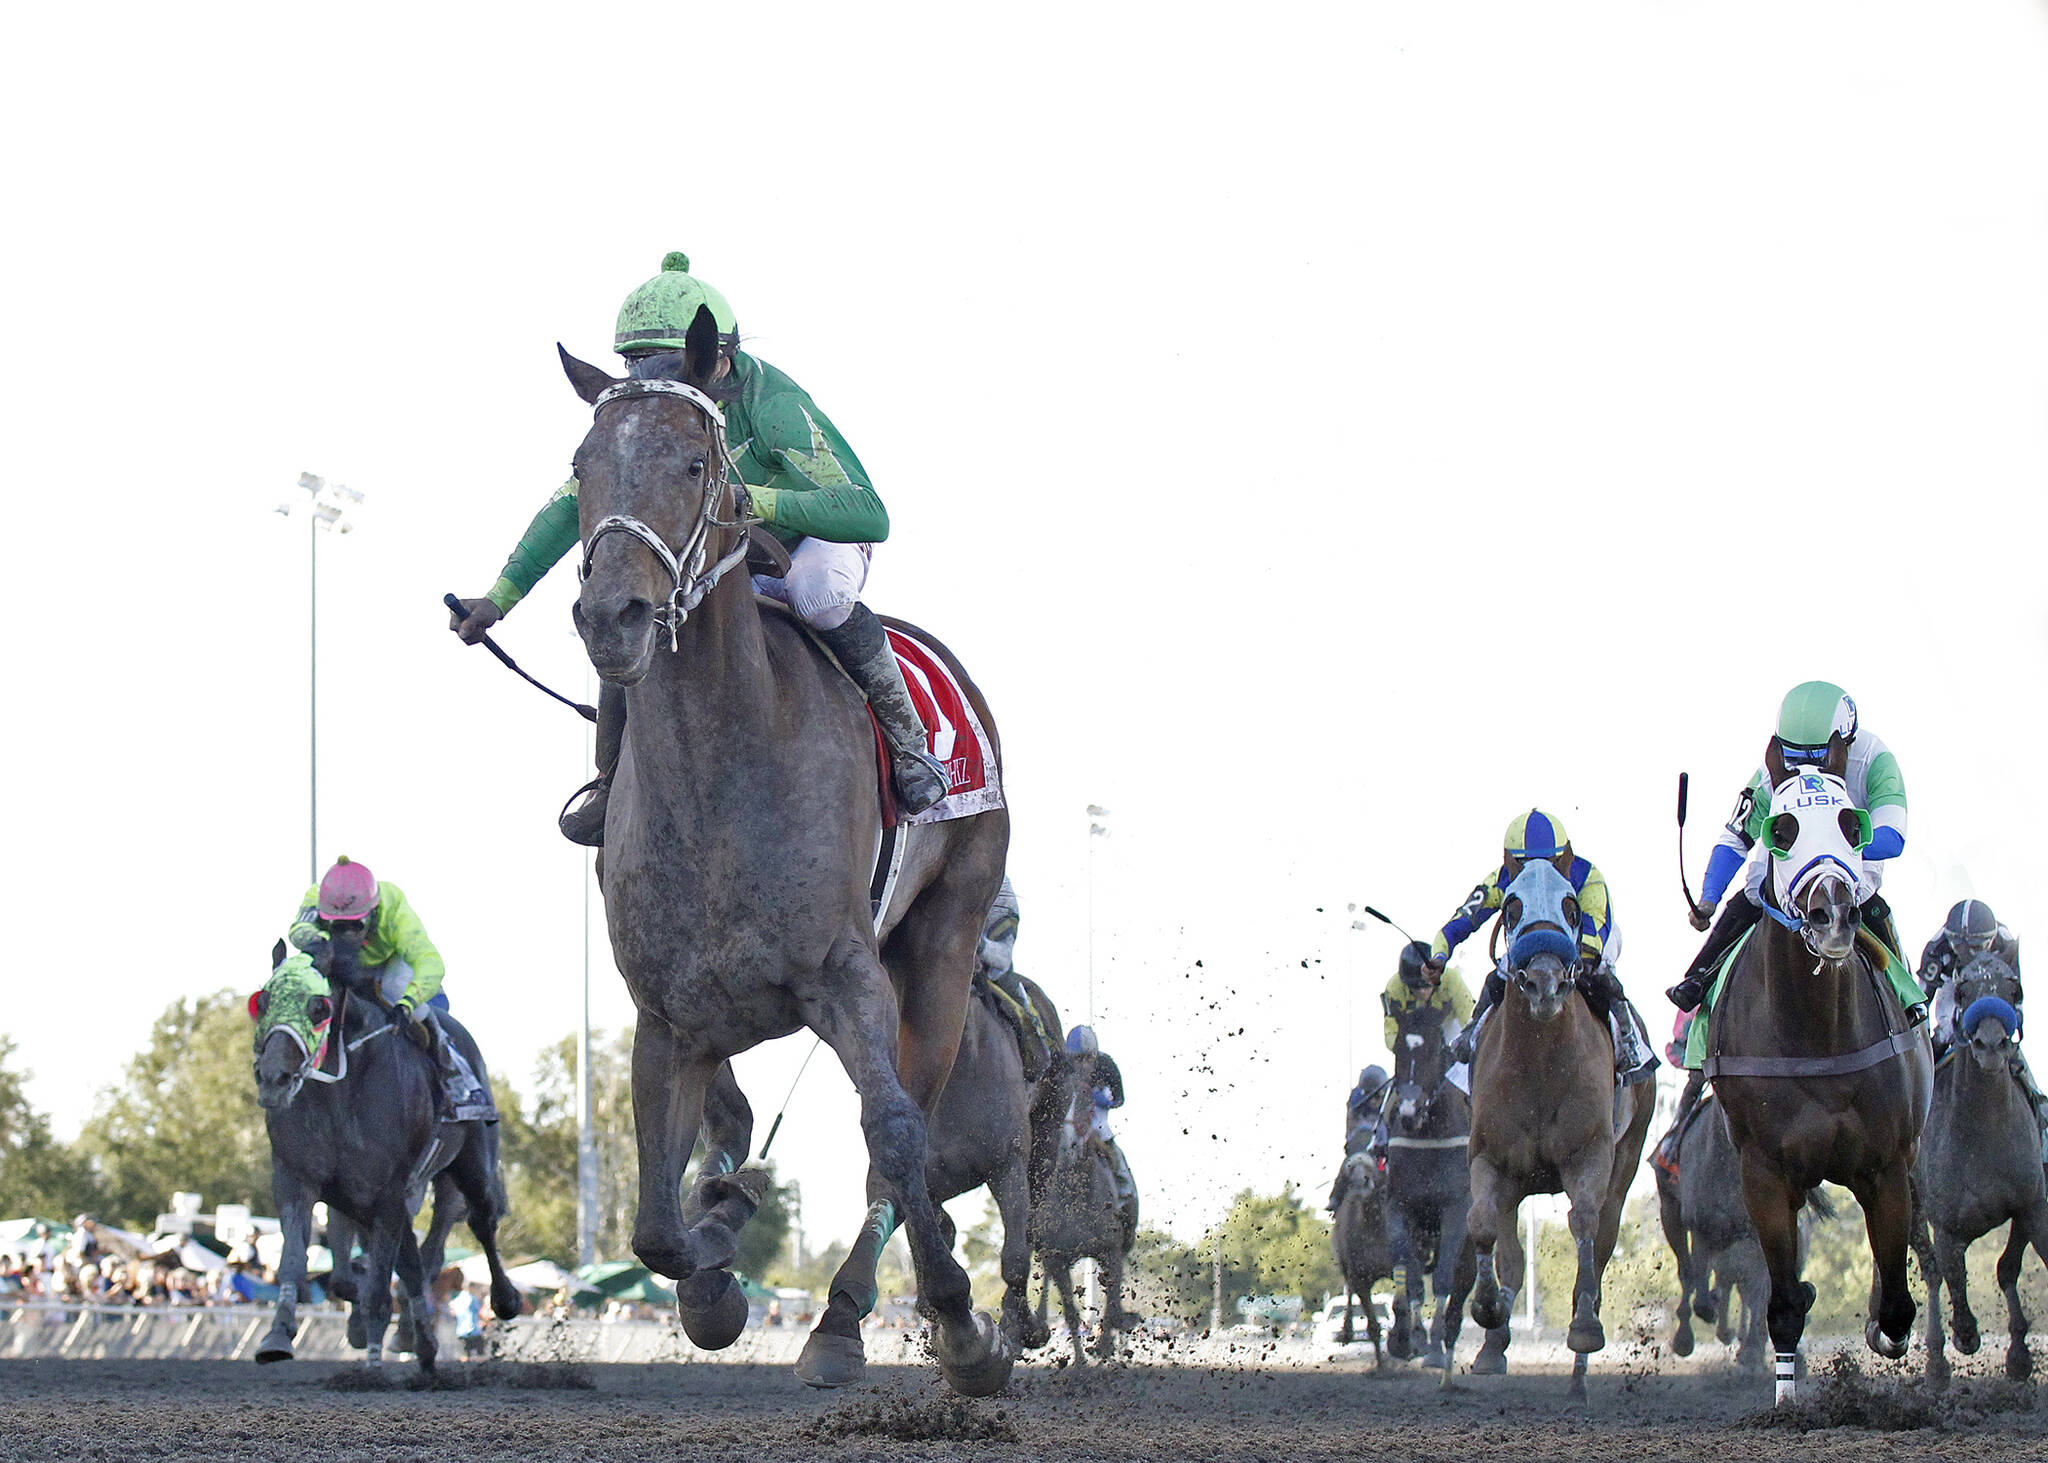 Slew's Tiz Whiz, ridden by Jose Zunino, pulls ahead of the other horses at the Longacres Mile. (Photo provided by Emerald Downs)